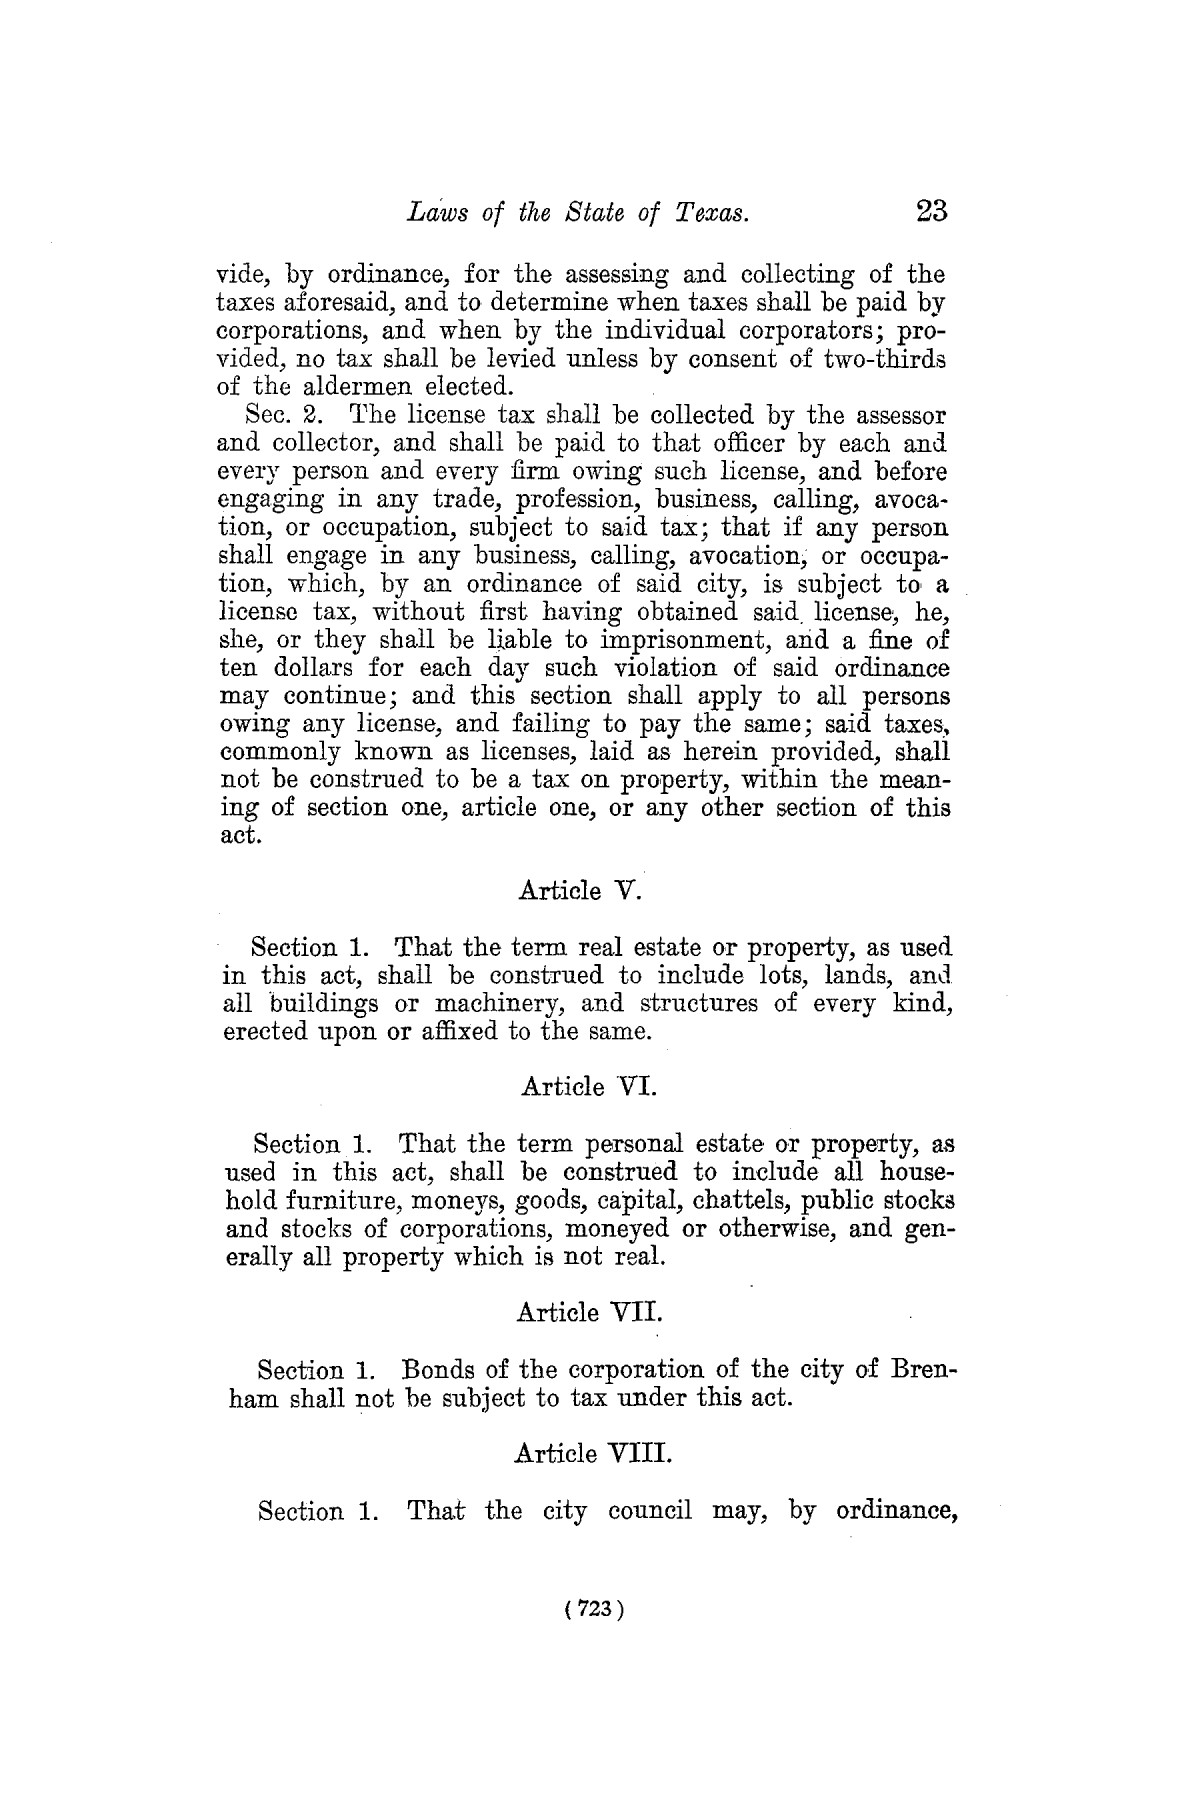 The Laws of Texas, 1822-1897 Volume 7
                                                
                                                    723
                                                